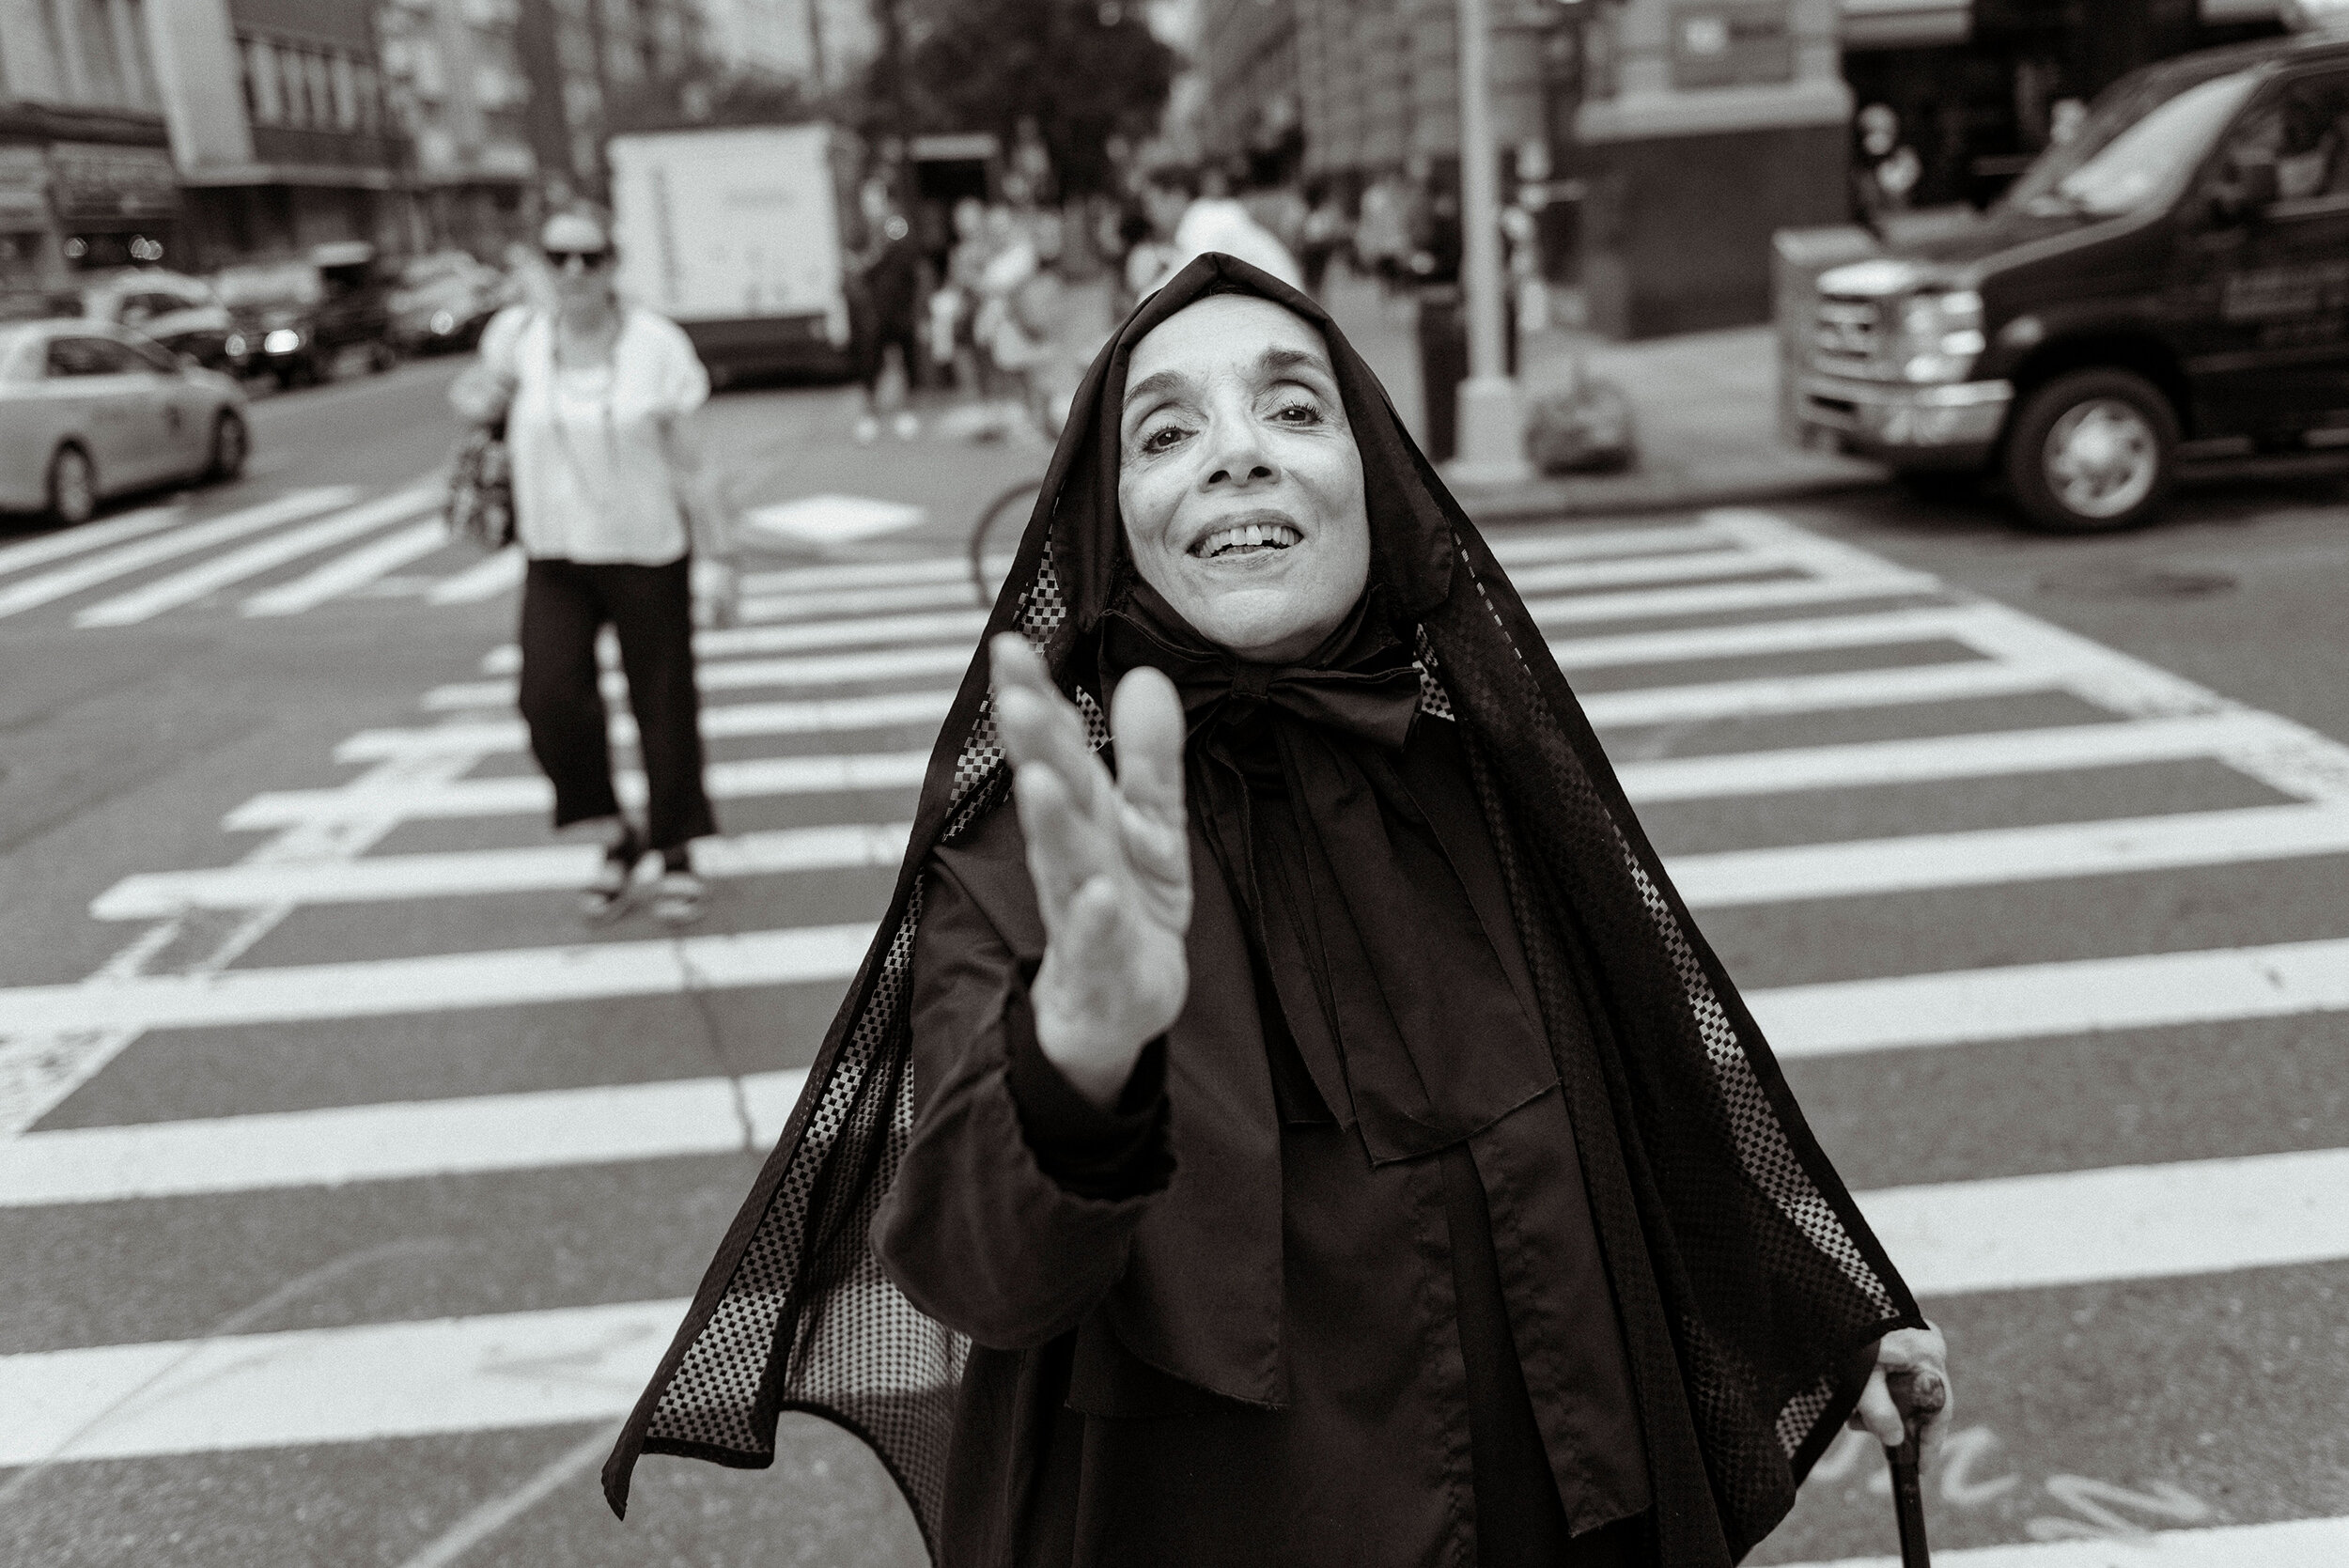 Blessings and Compassion from Mother Cabrini, Saint of the Immigrants. Photo: Paul Takeuchi